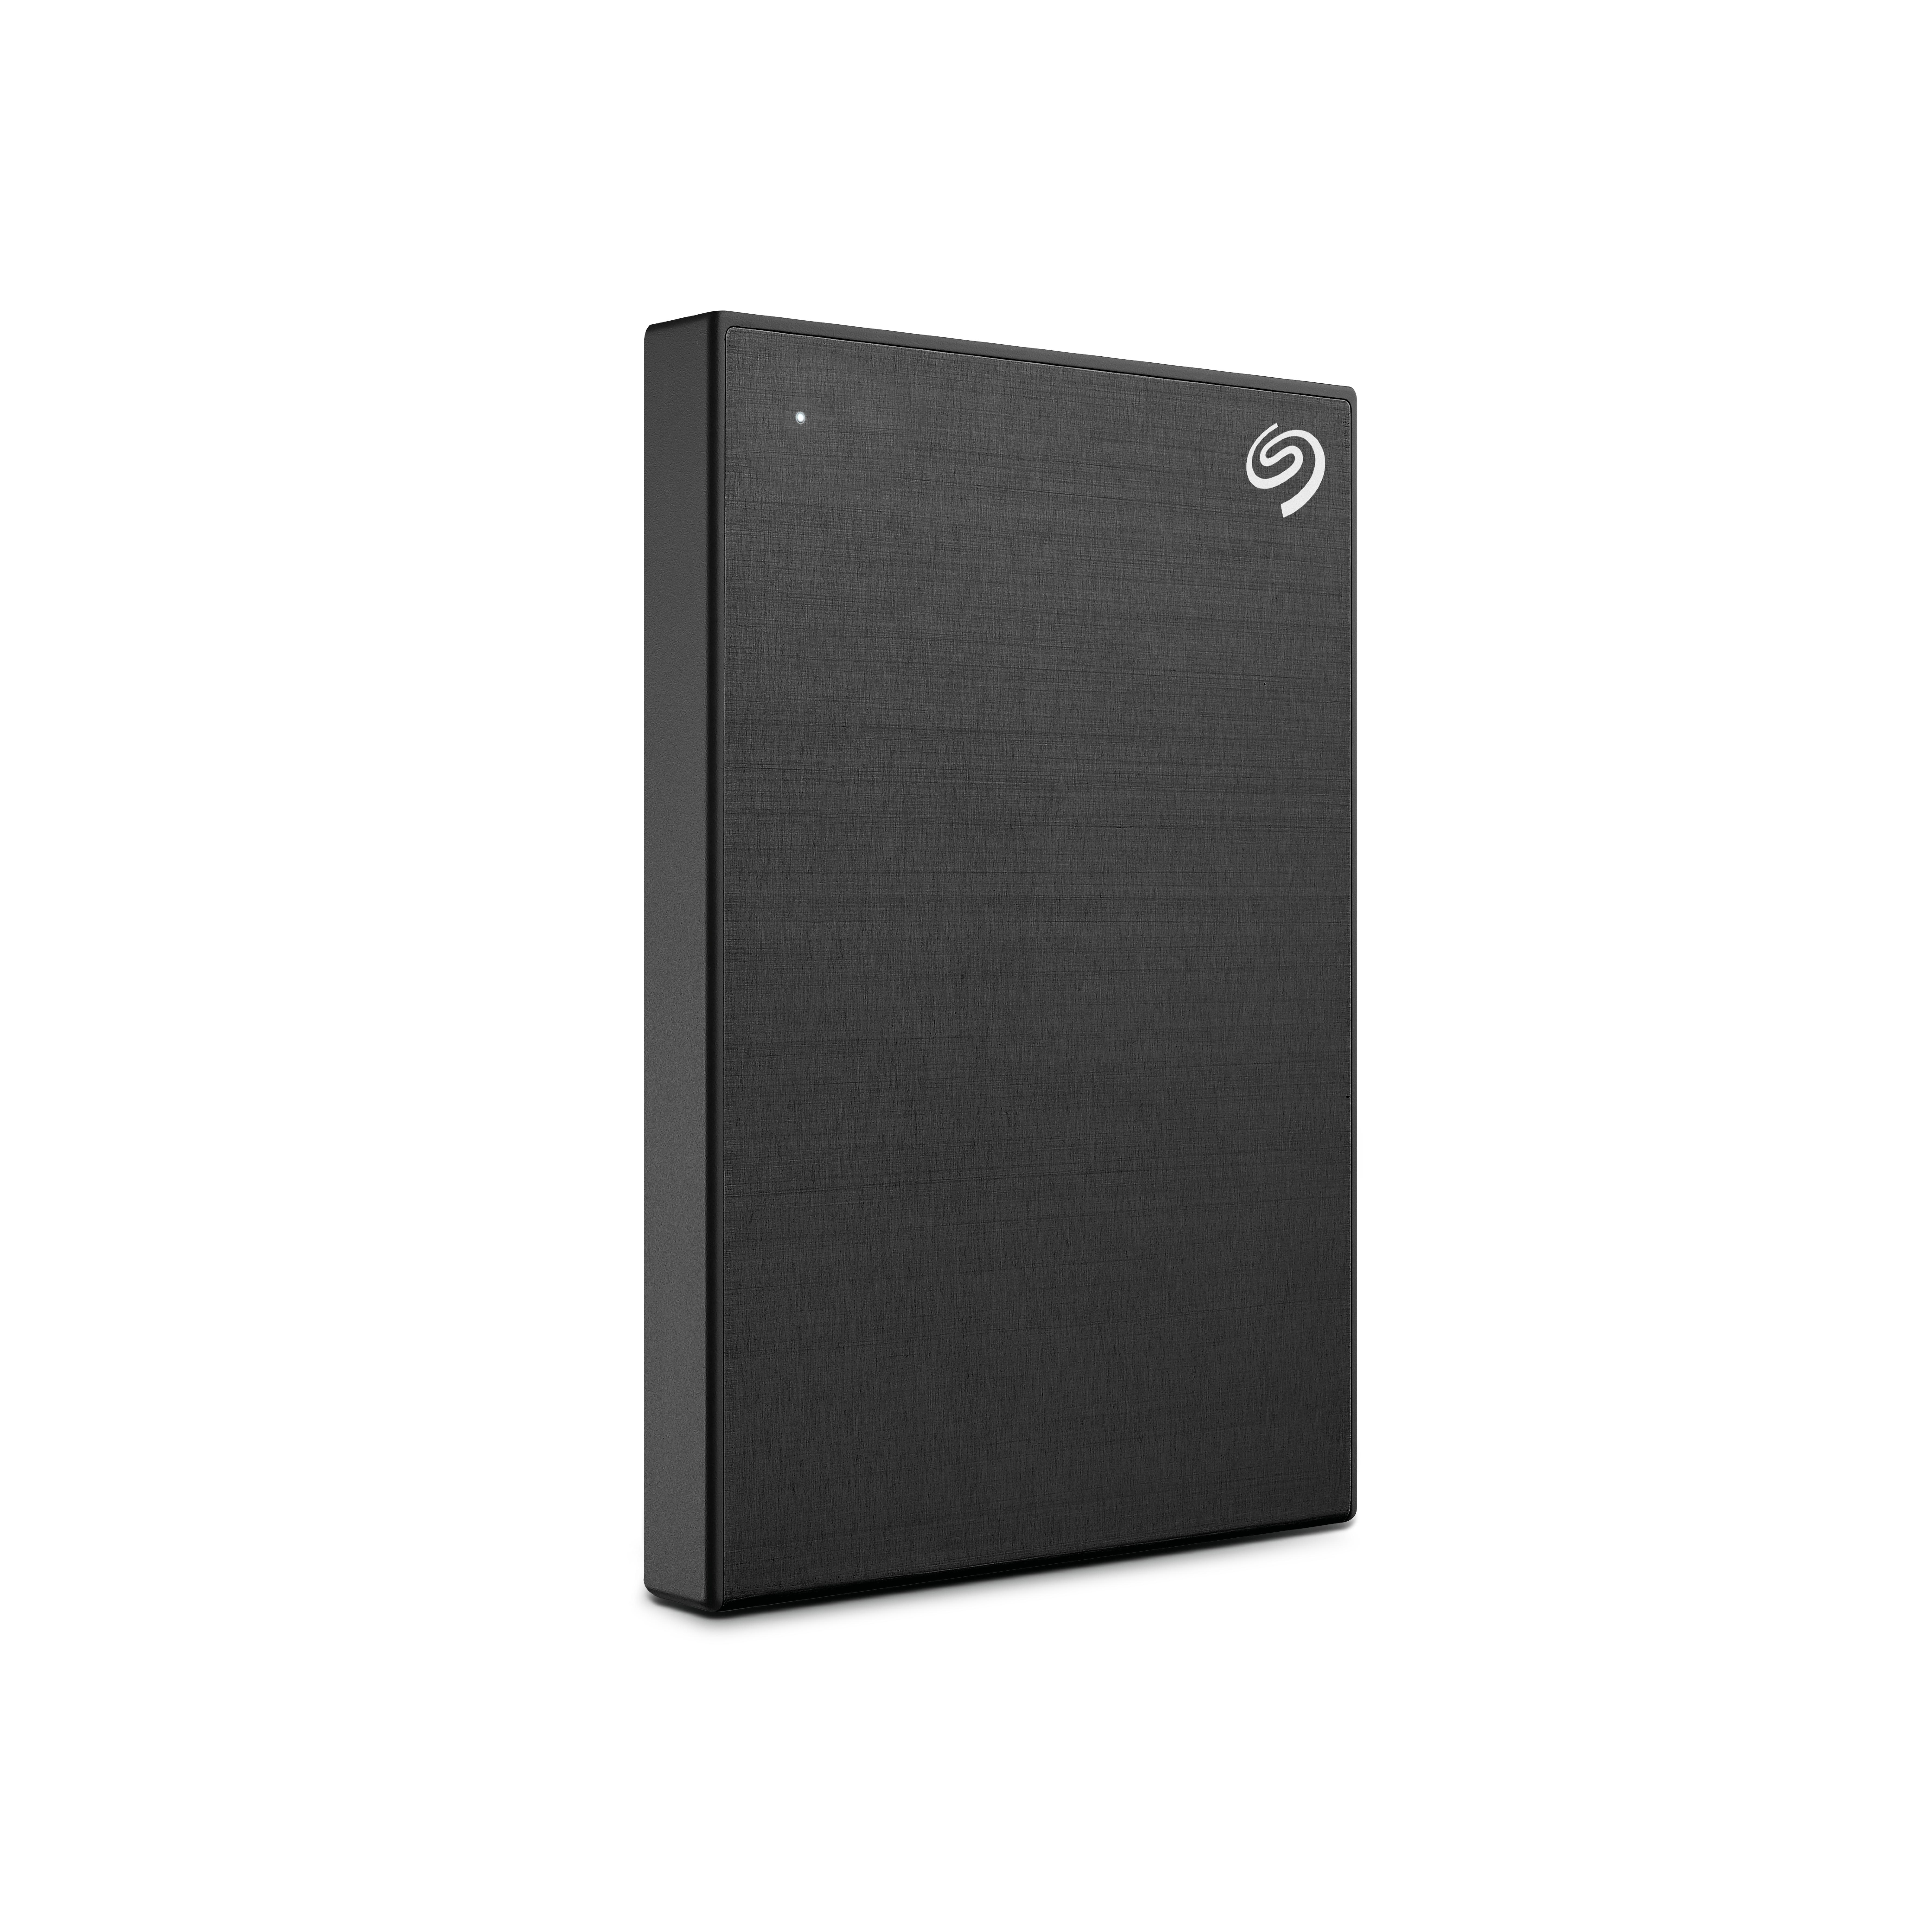 SEAGATE One Touch mobile Festplatte, Zoll, Schwarz TB 1 extern, 2,5 HDD